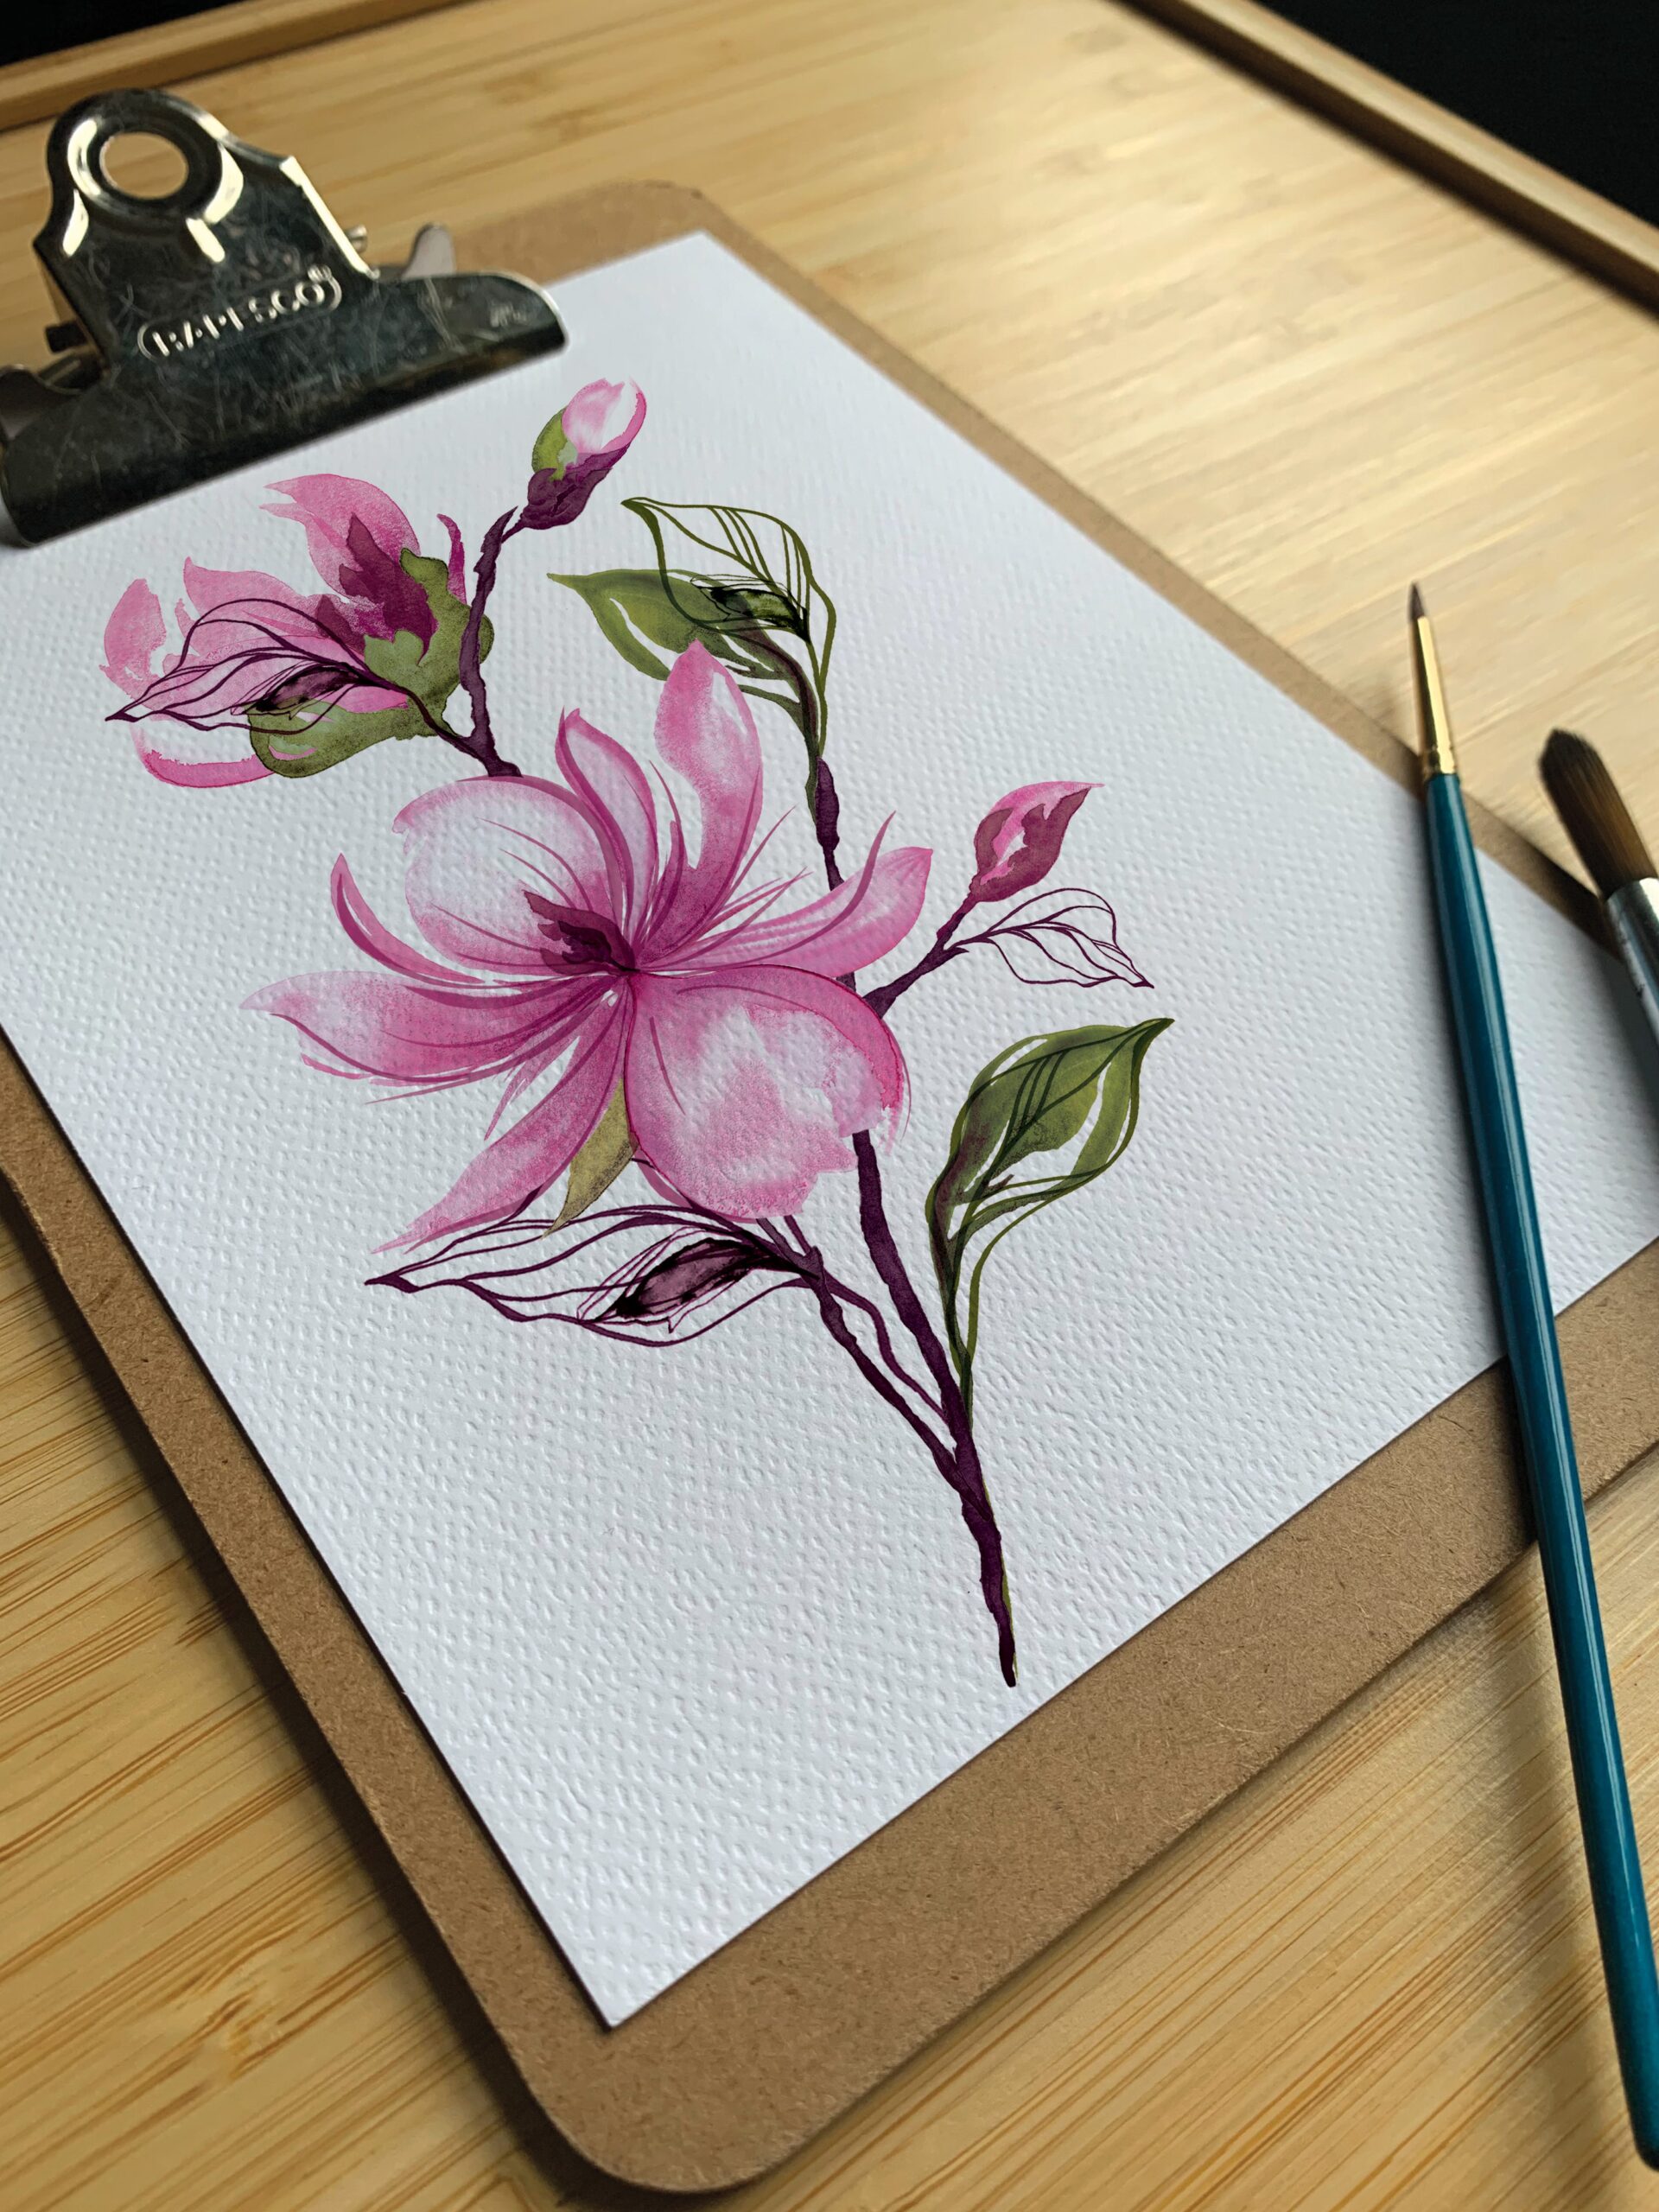 A watercolour drawing of a flower